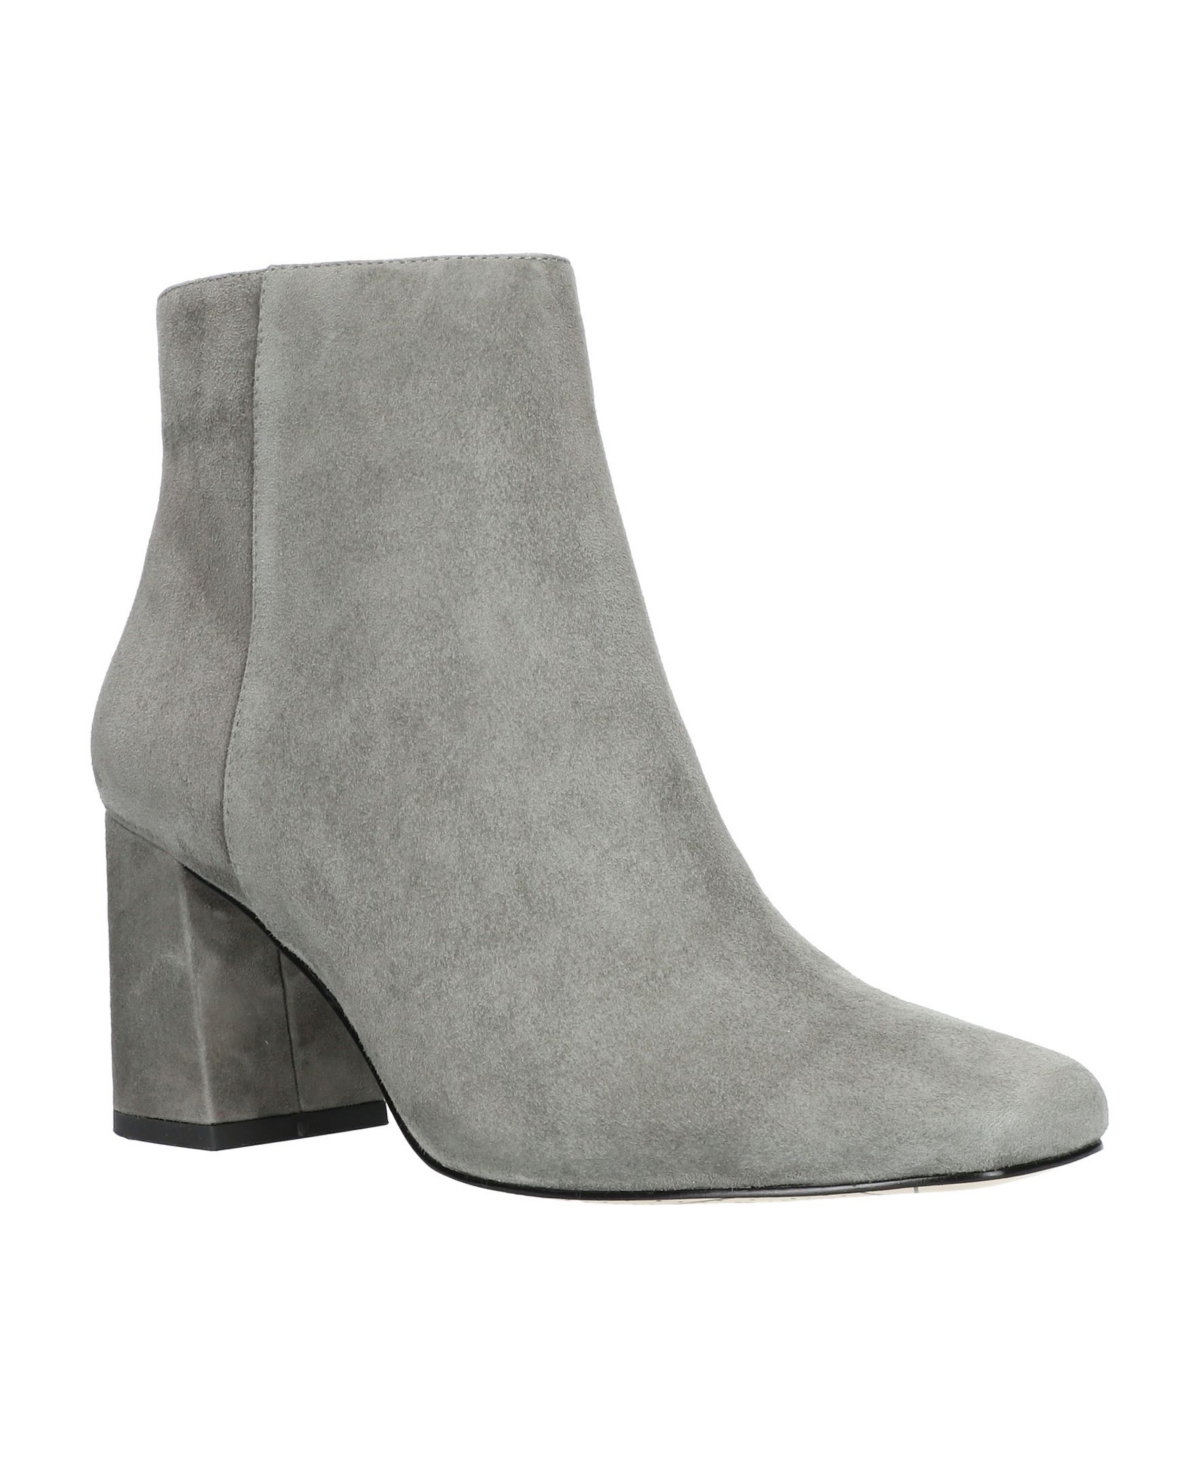 Square Toe Ankle Boots - Grey Suede Leather